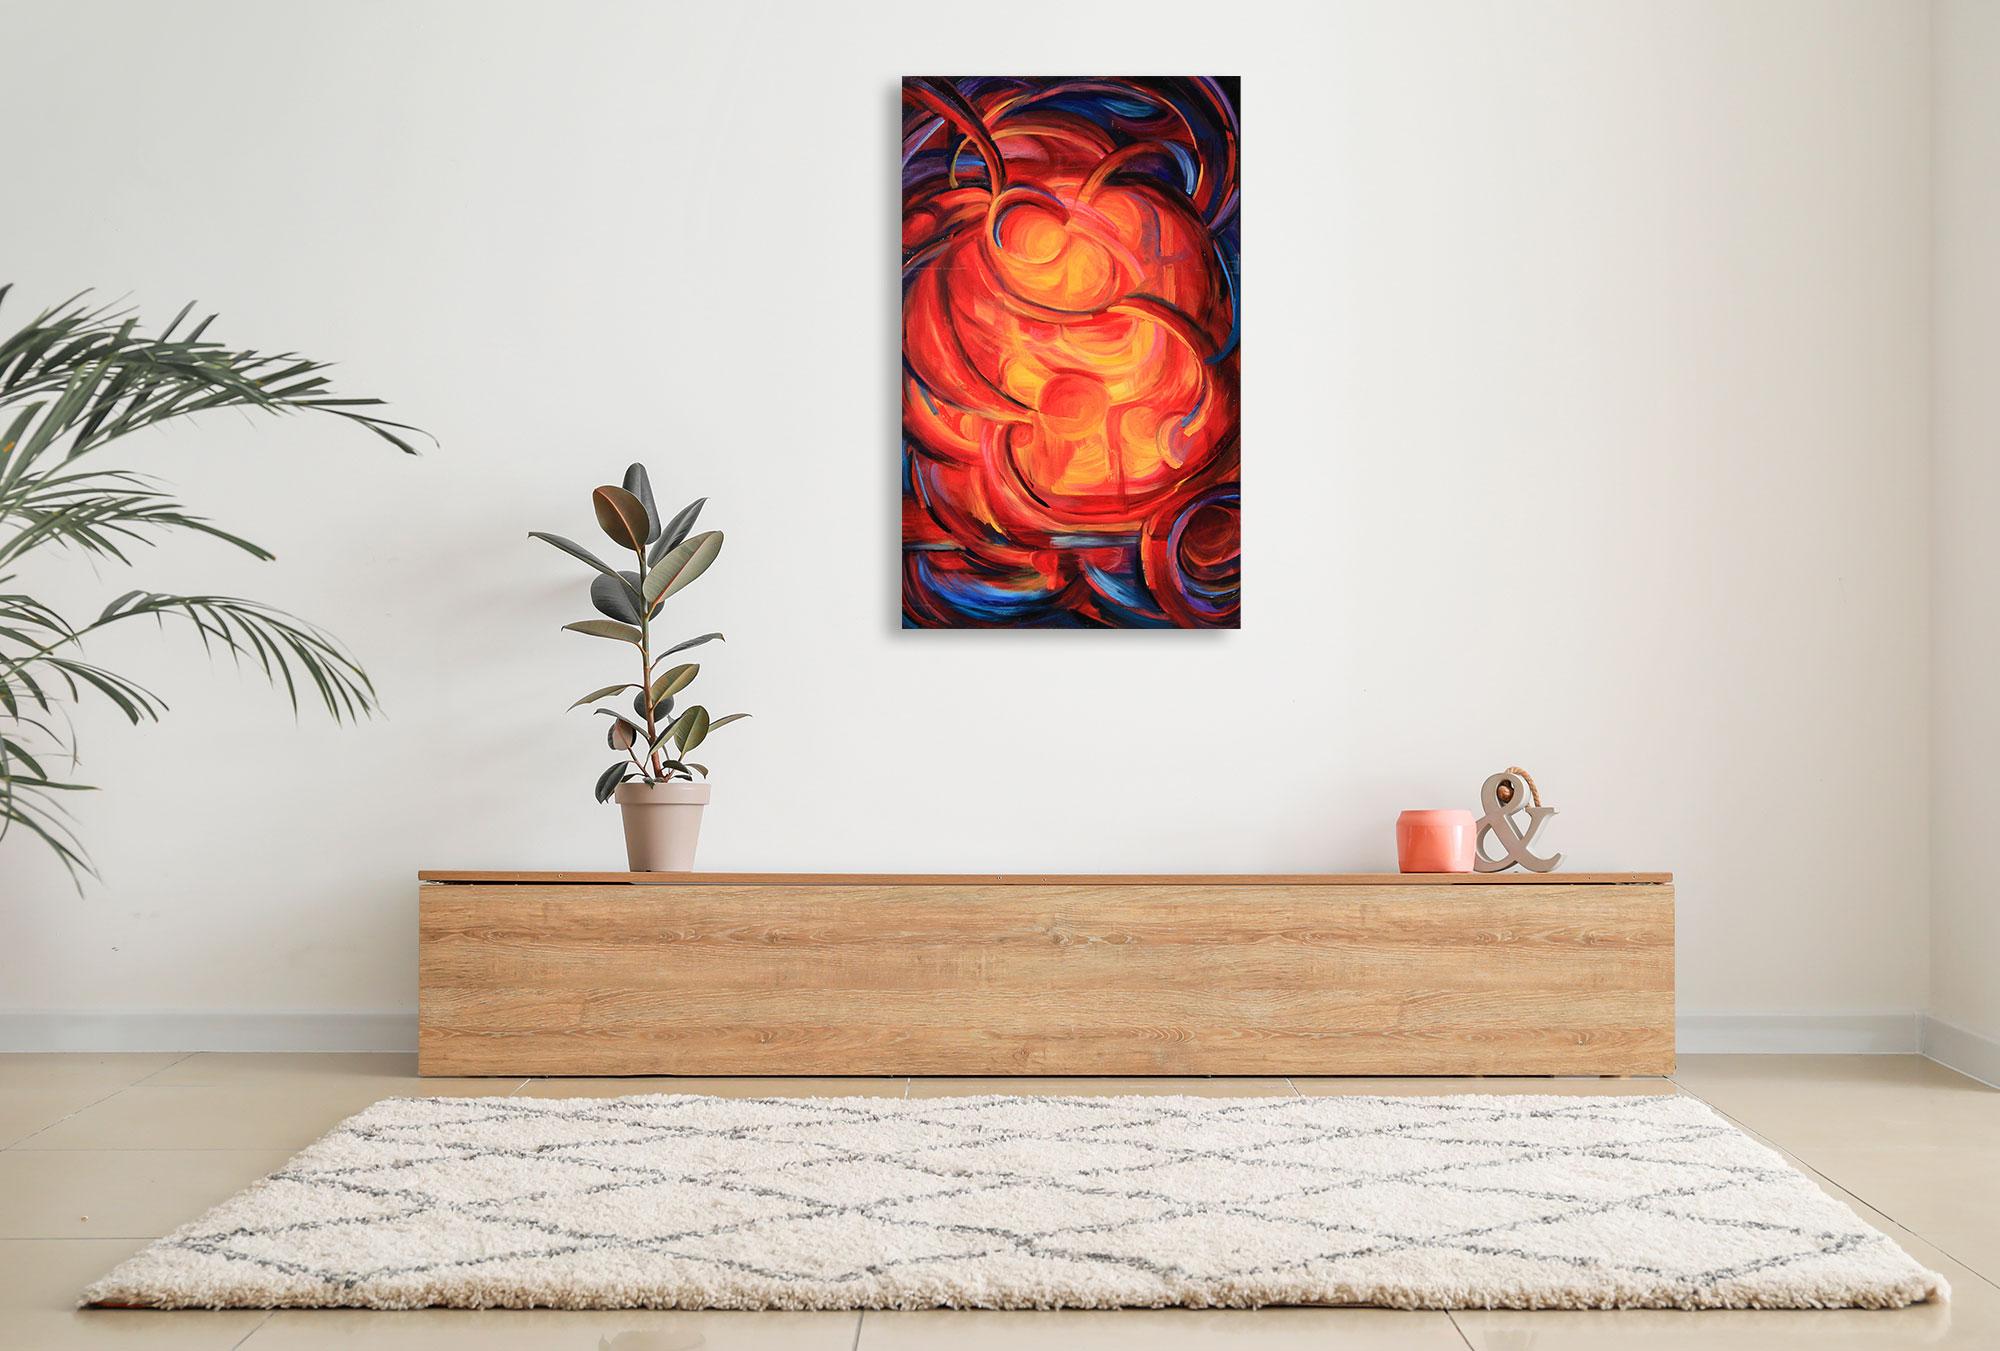 Fire Balls Forming - Oil On Canvas - Abstract Painting By Dante Rondo For Sale 1